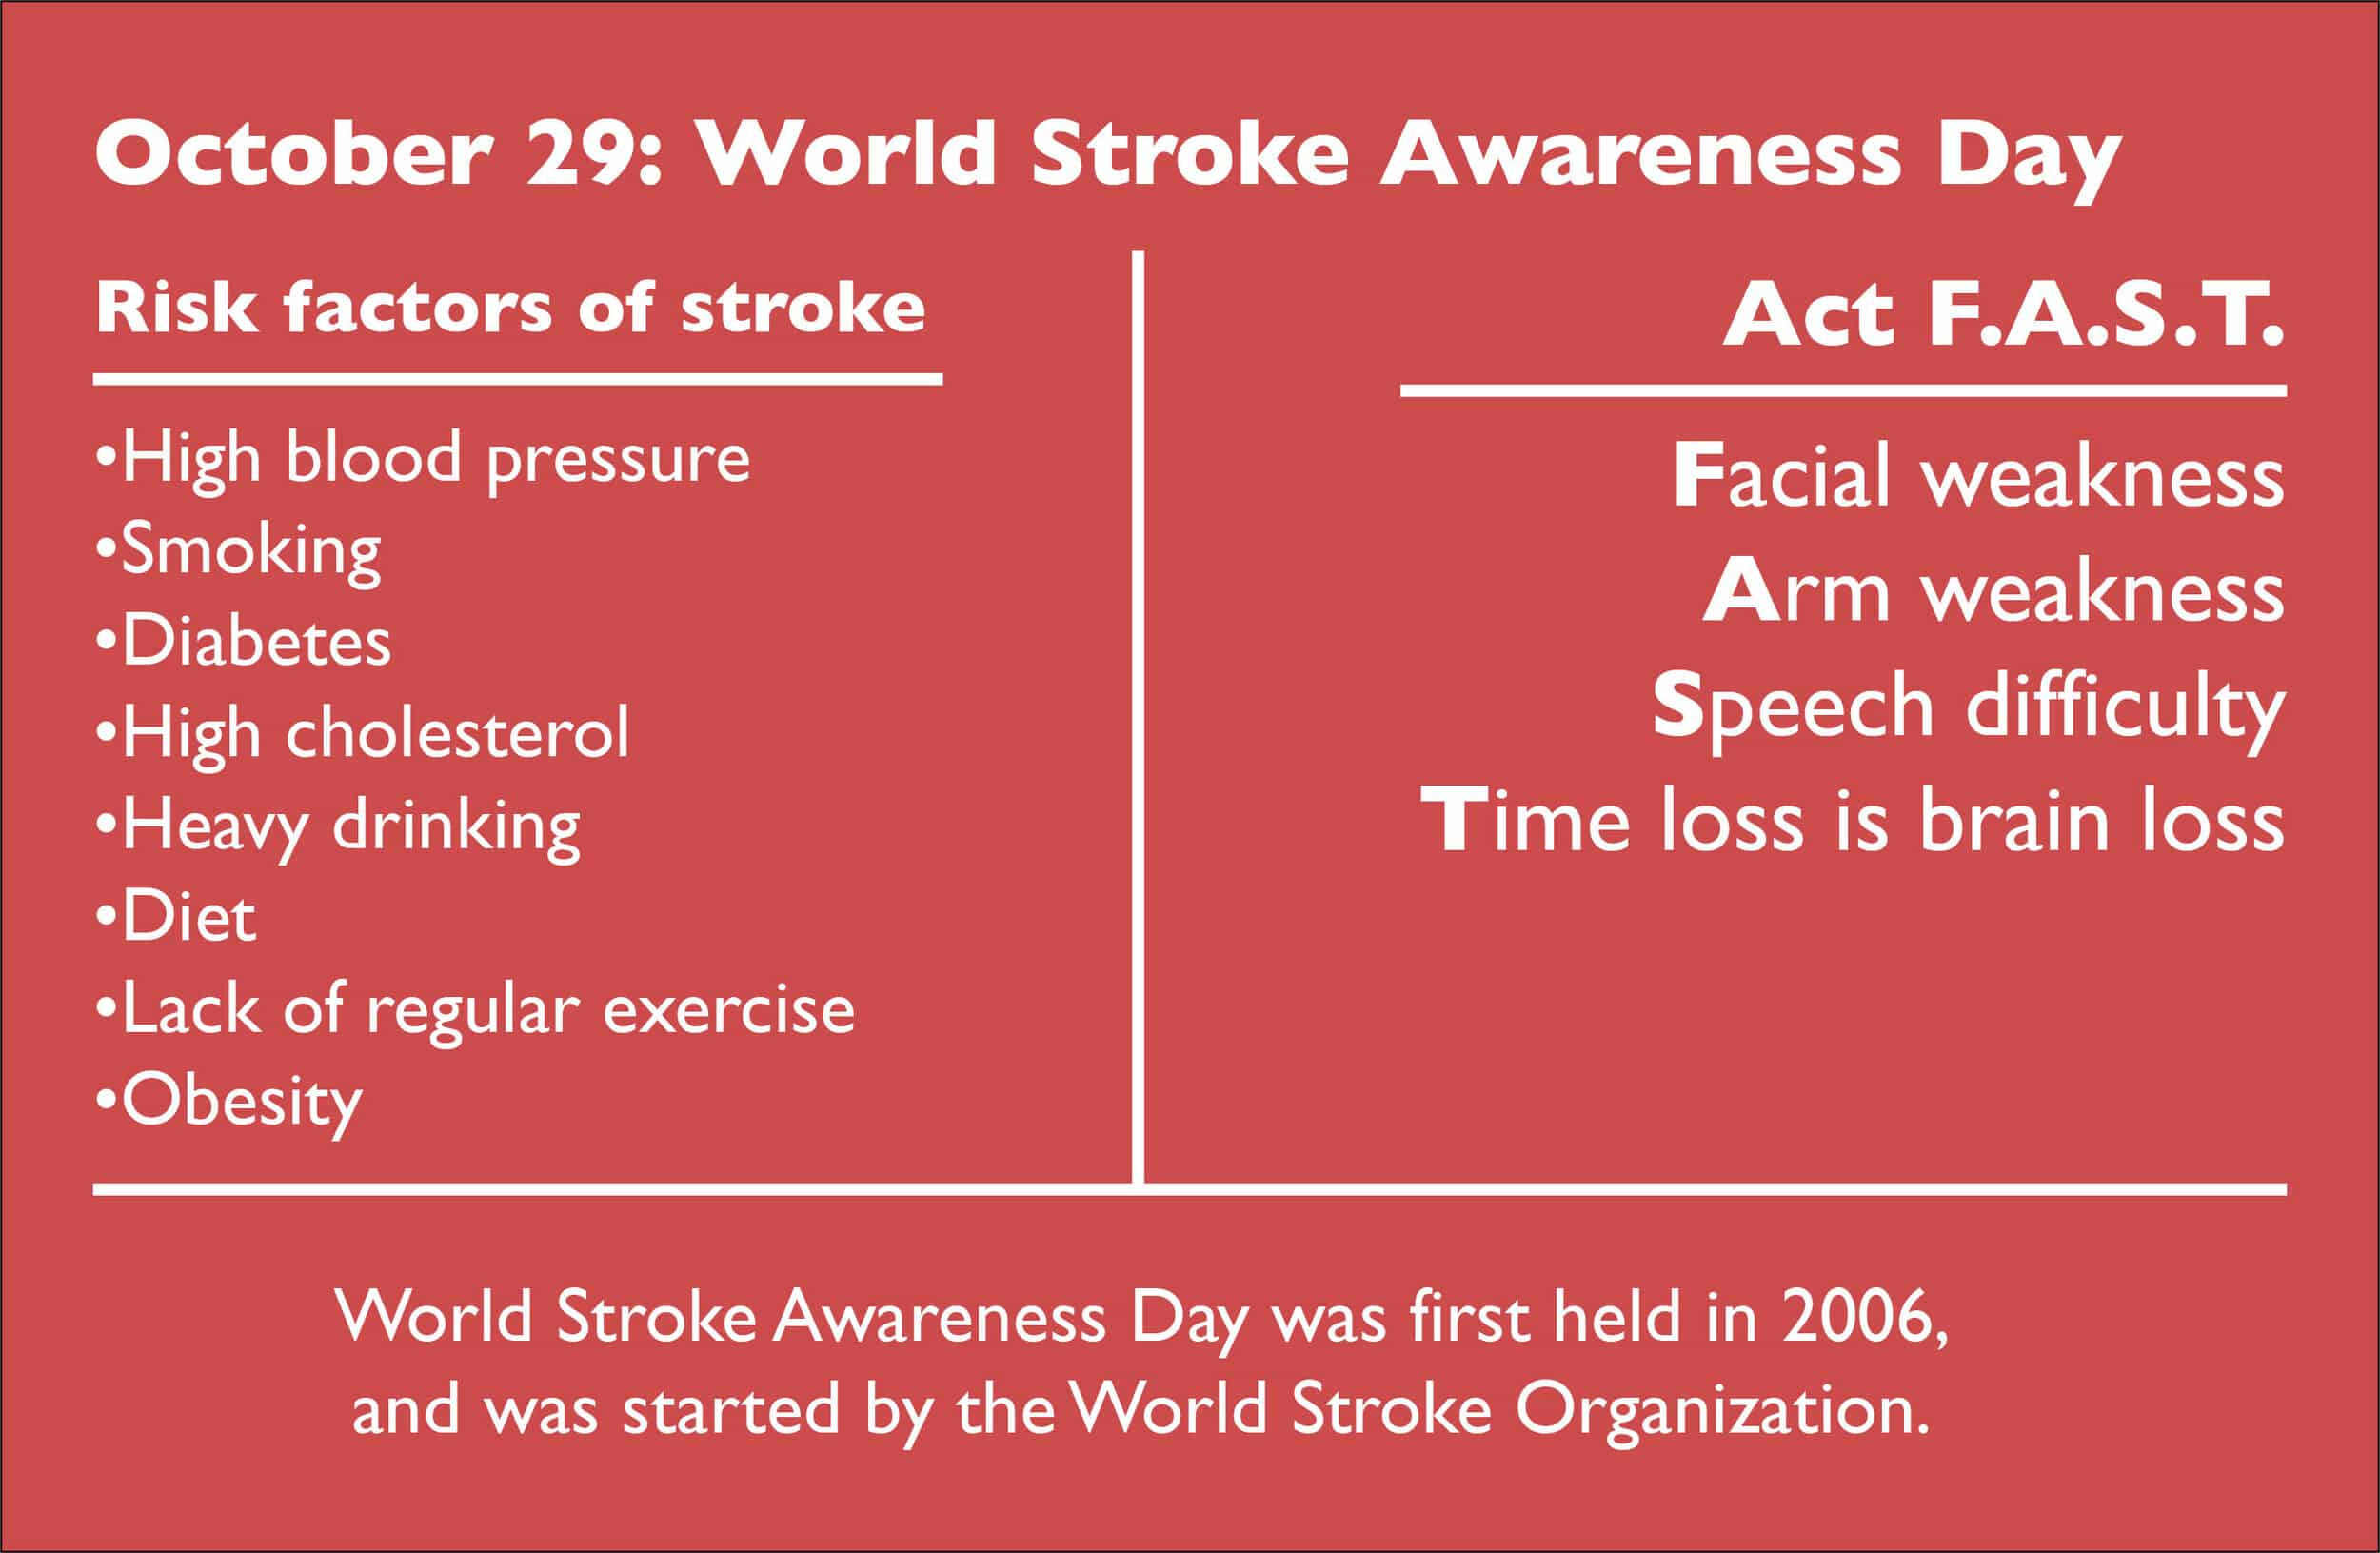 One in four people are at risk of having a stroke. A little information can save a life.Sources: nationaldaycalendar.com &amp; betterhealth.vic.gov.au